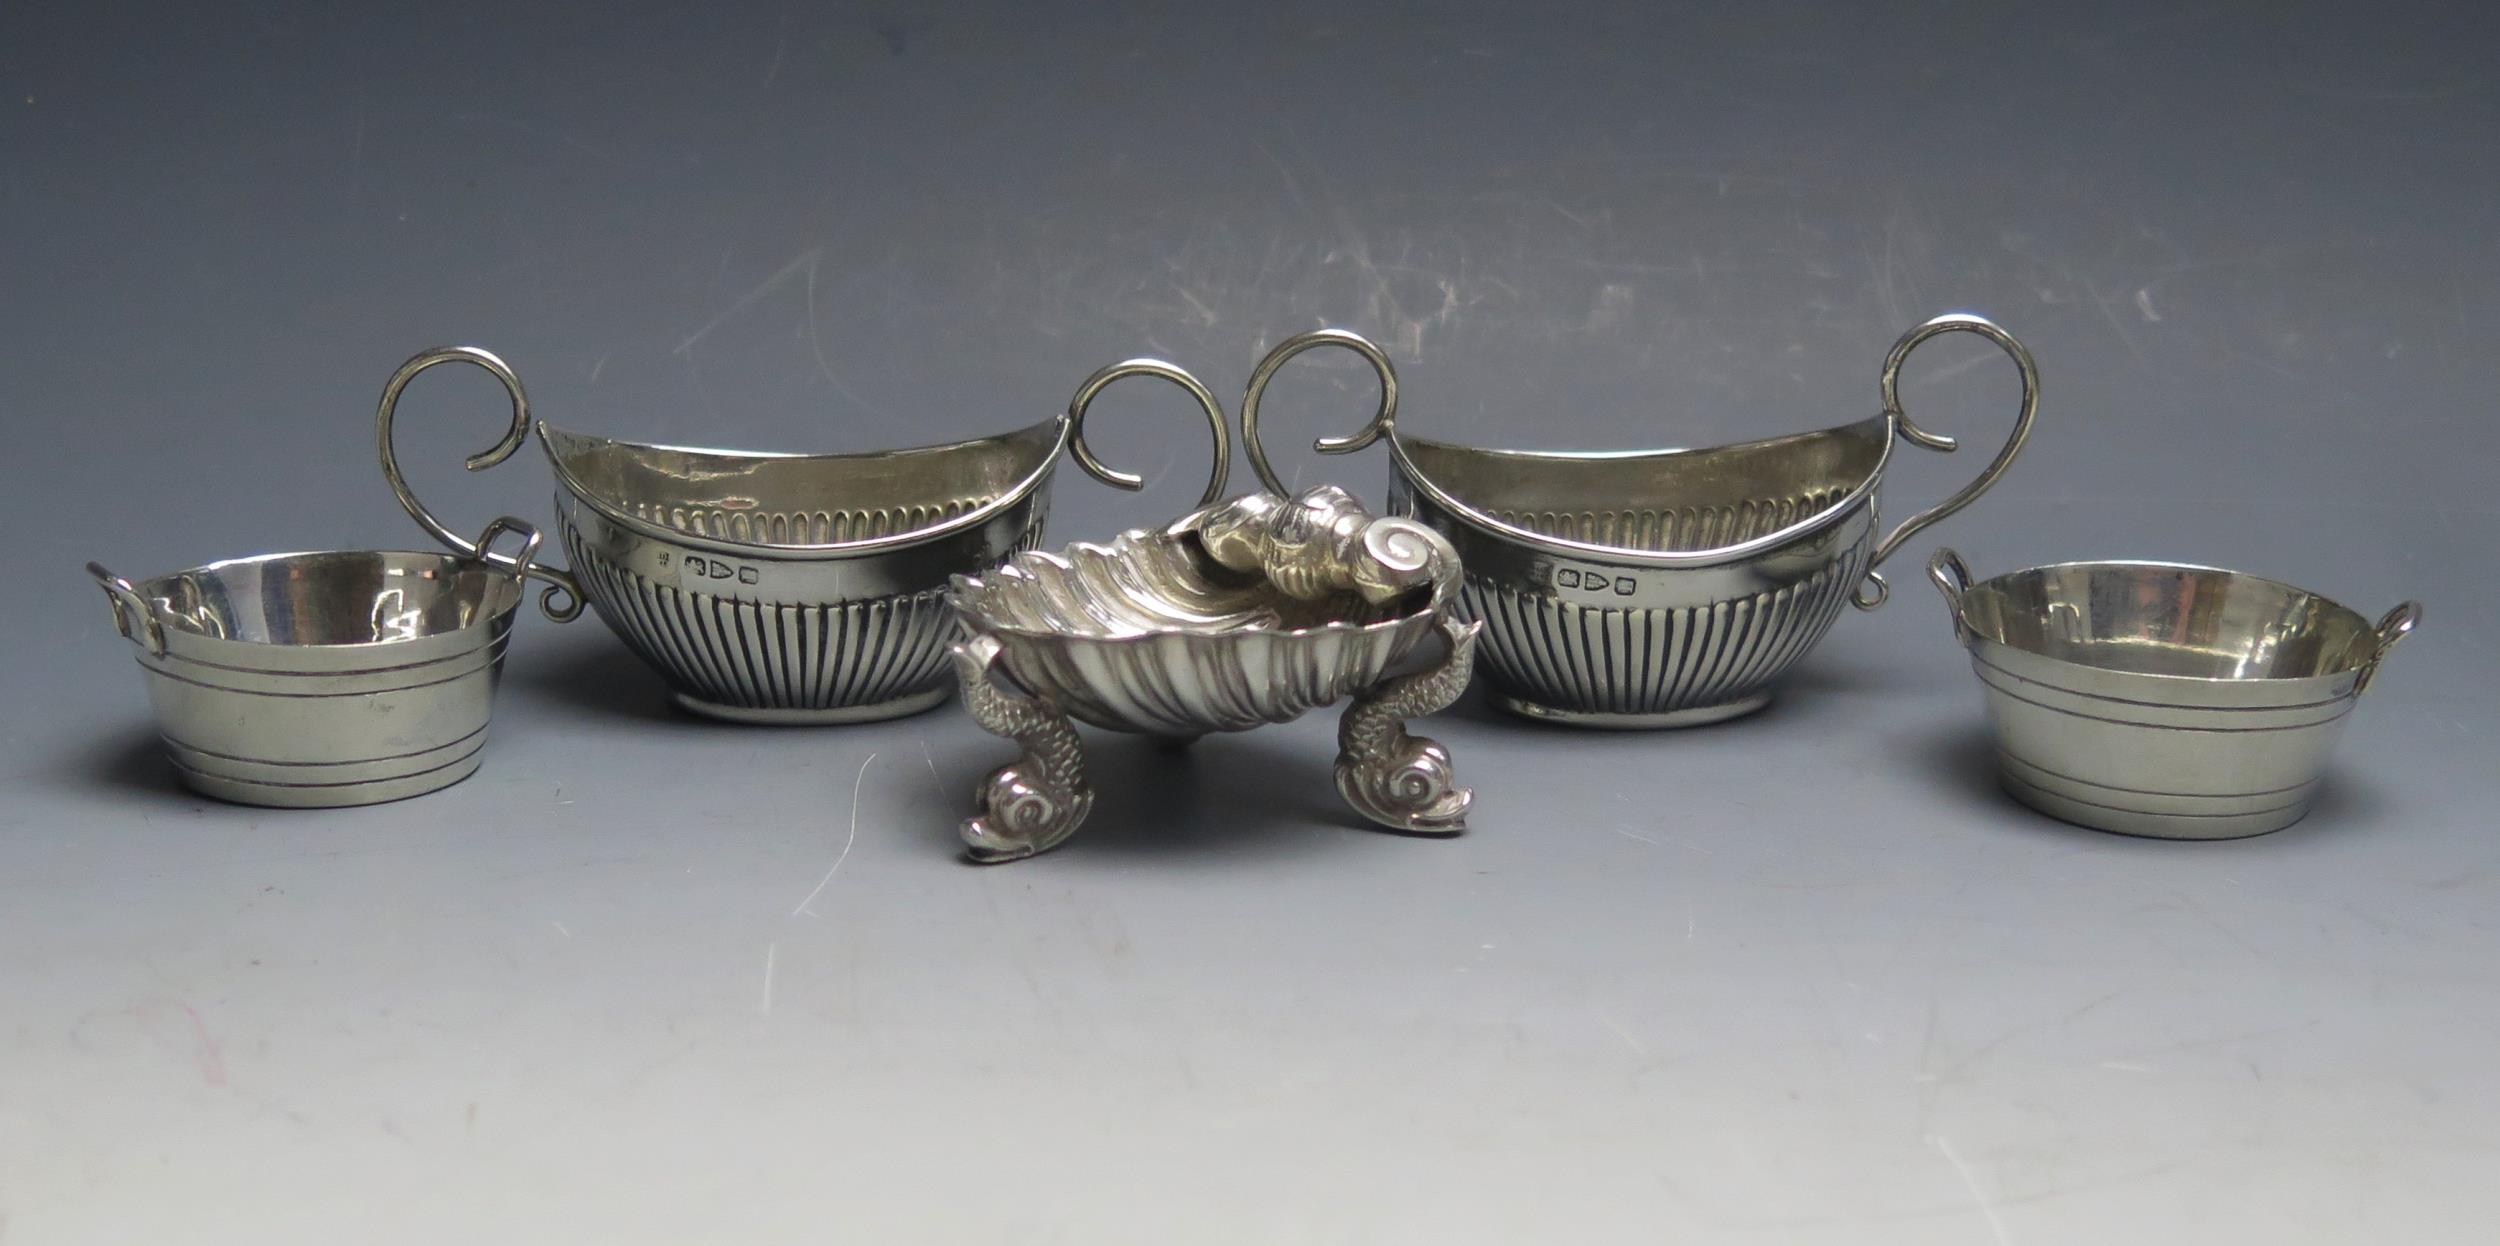 A pair of Victorian silver salts, maker's mark worn, Chester, 1894, together with another pair of